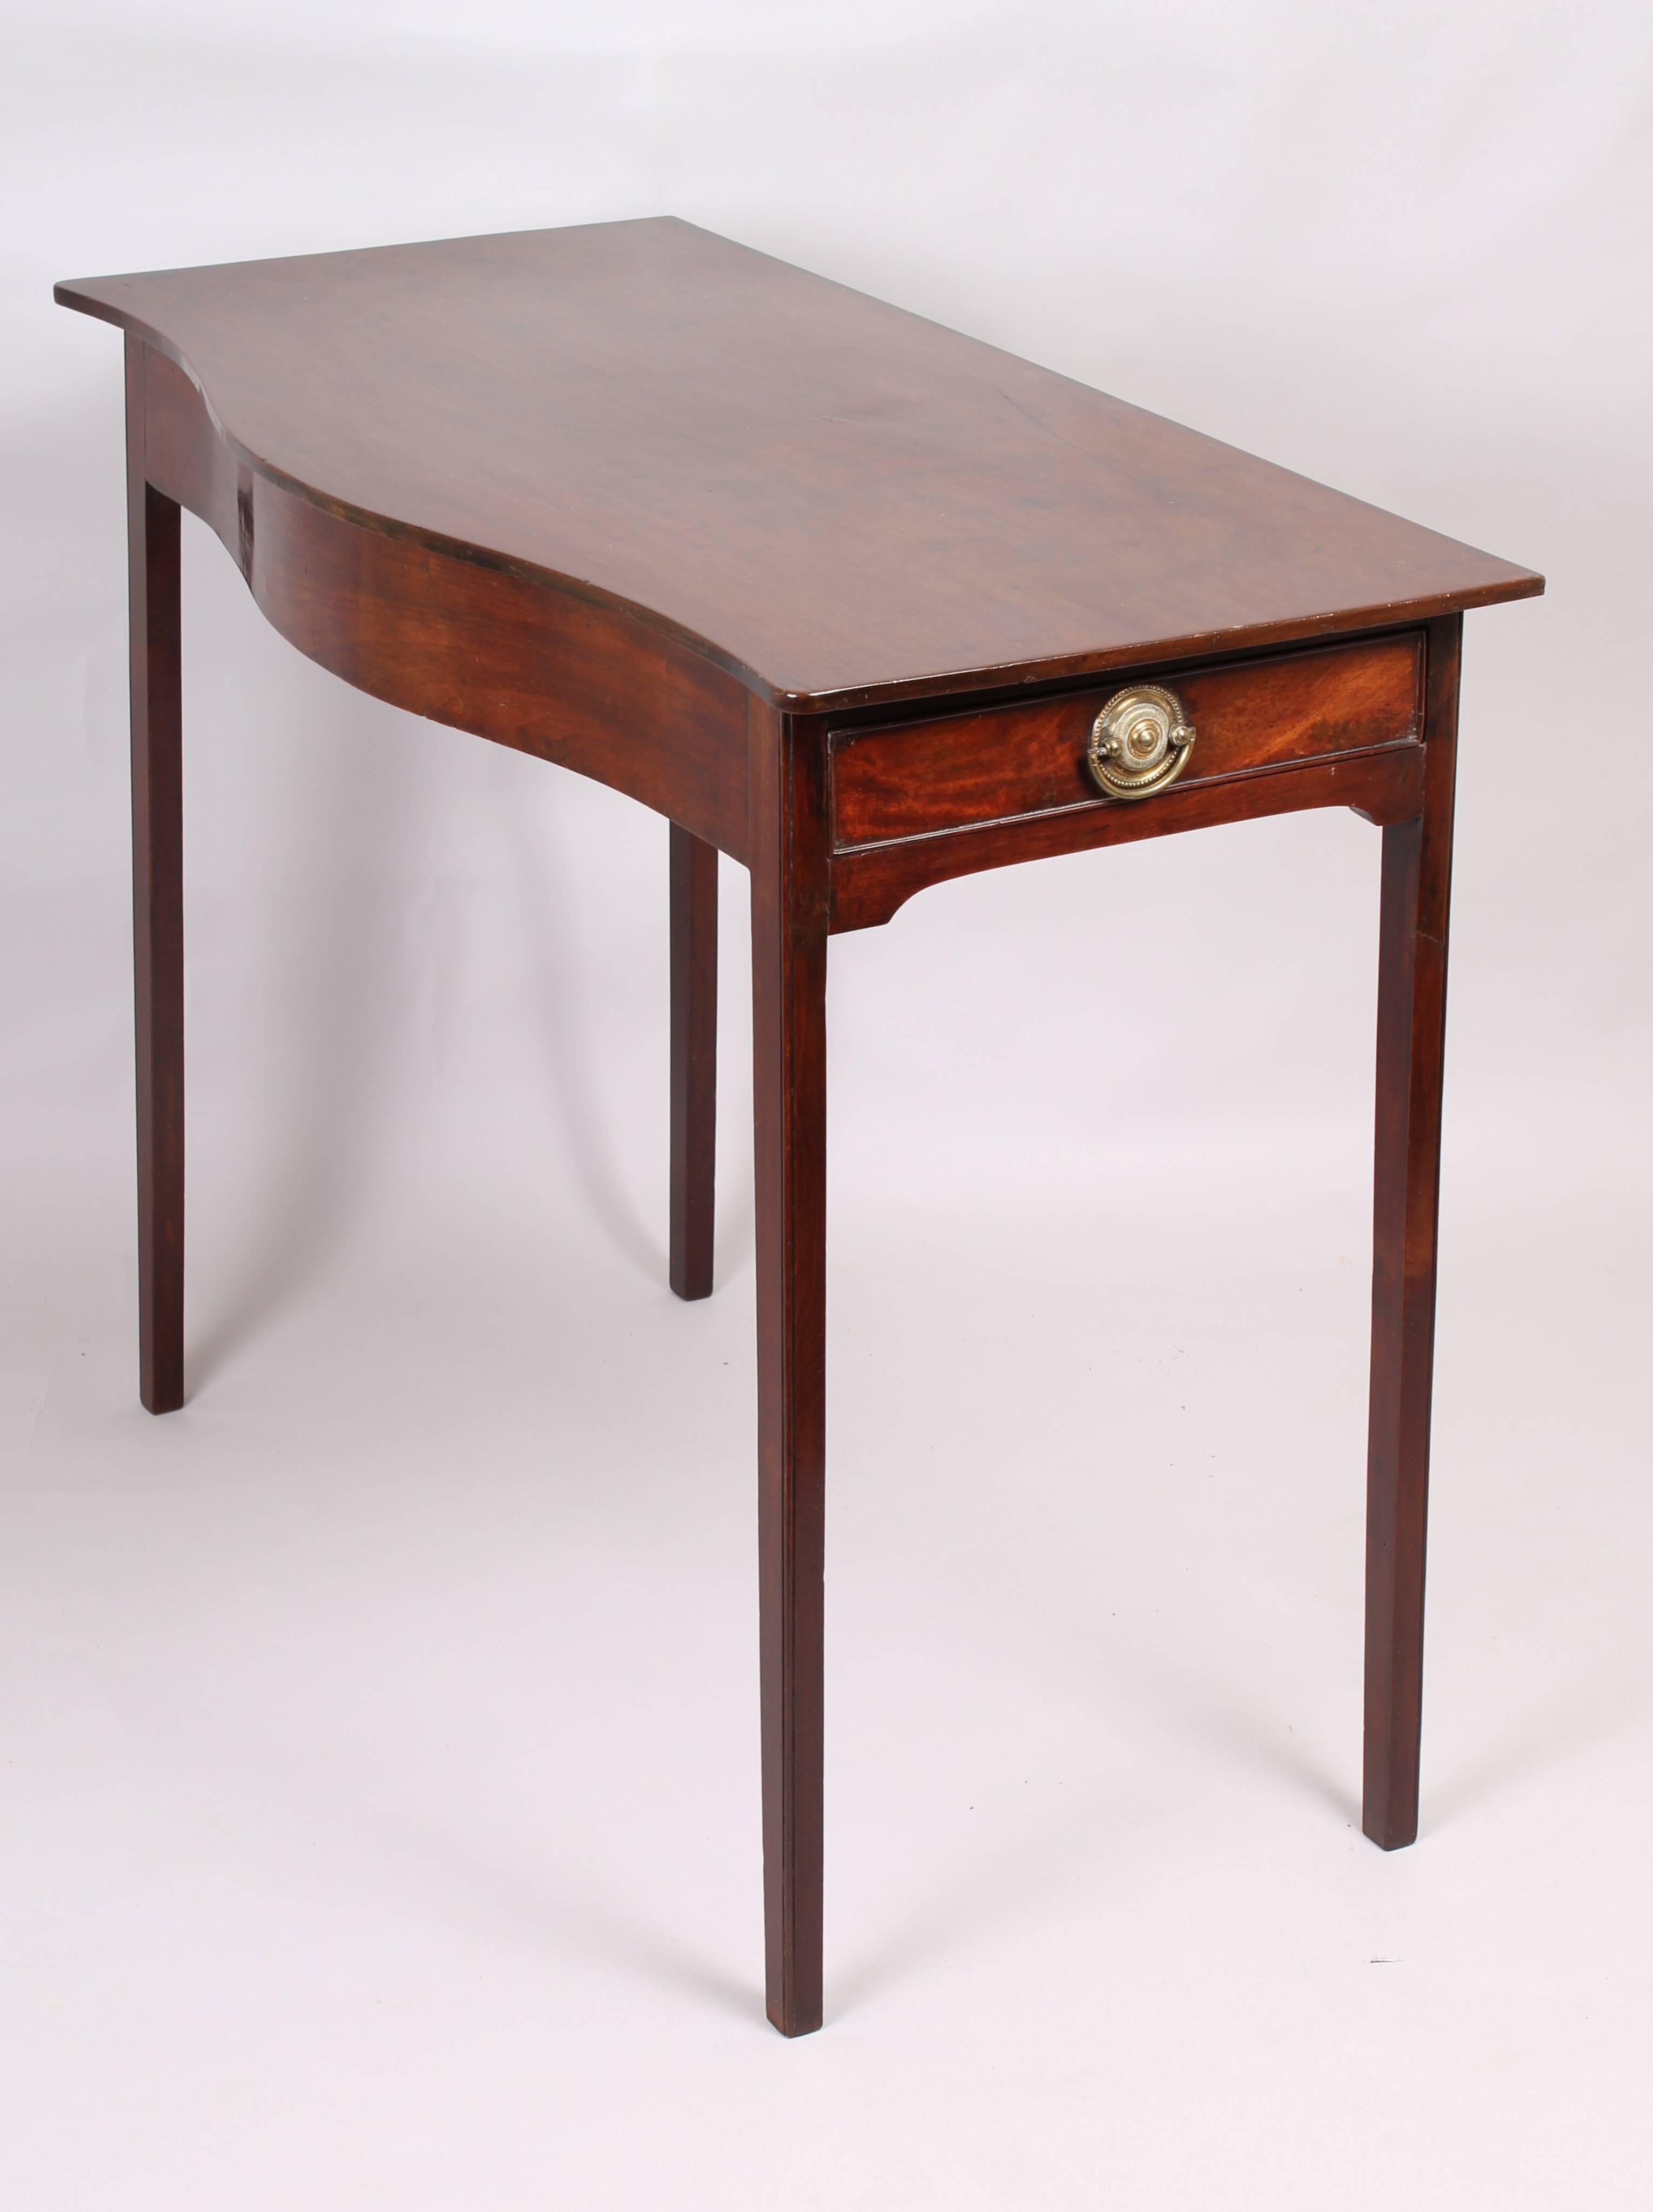 George III period mahogany side table of simple serpentine form; the overhanging top on a frame with an oak-lined drawer fitted in the right-hand side.